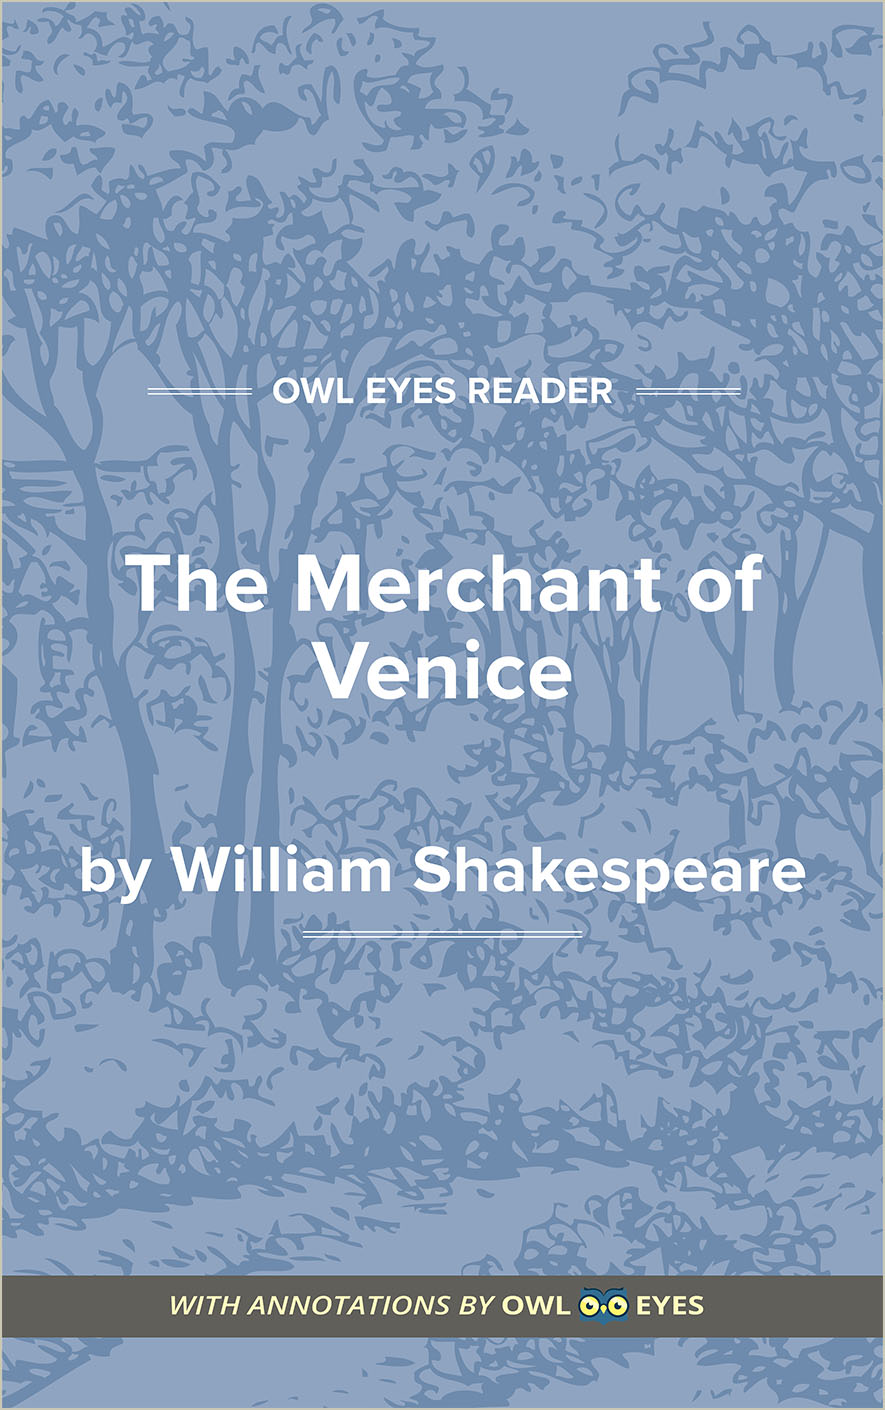 The Merchant of Venice Cover Image